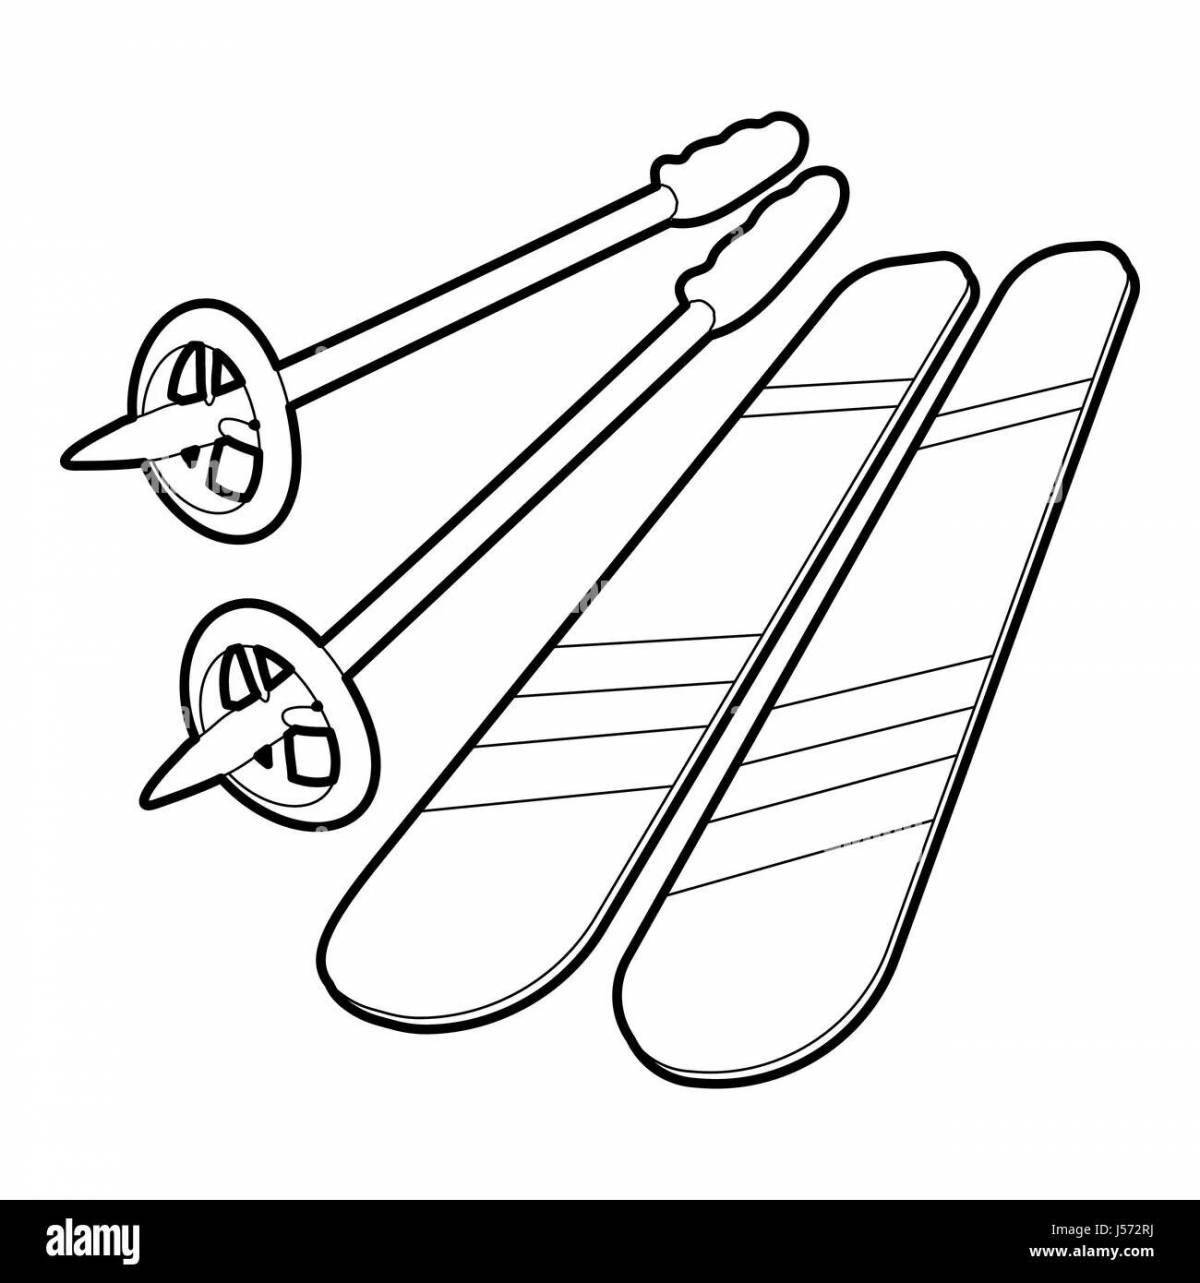 Cute skis for kids